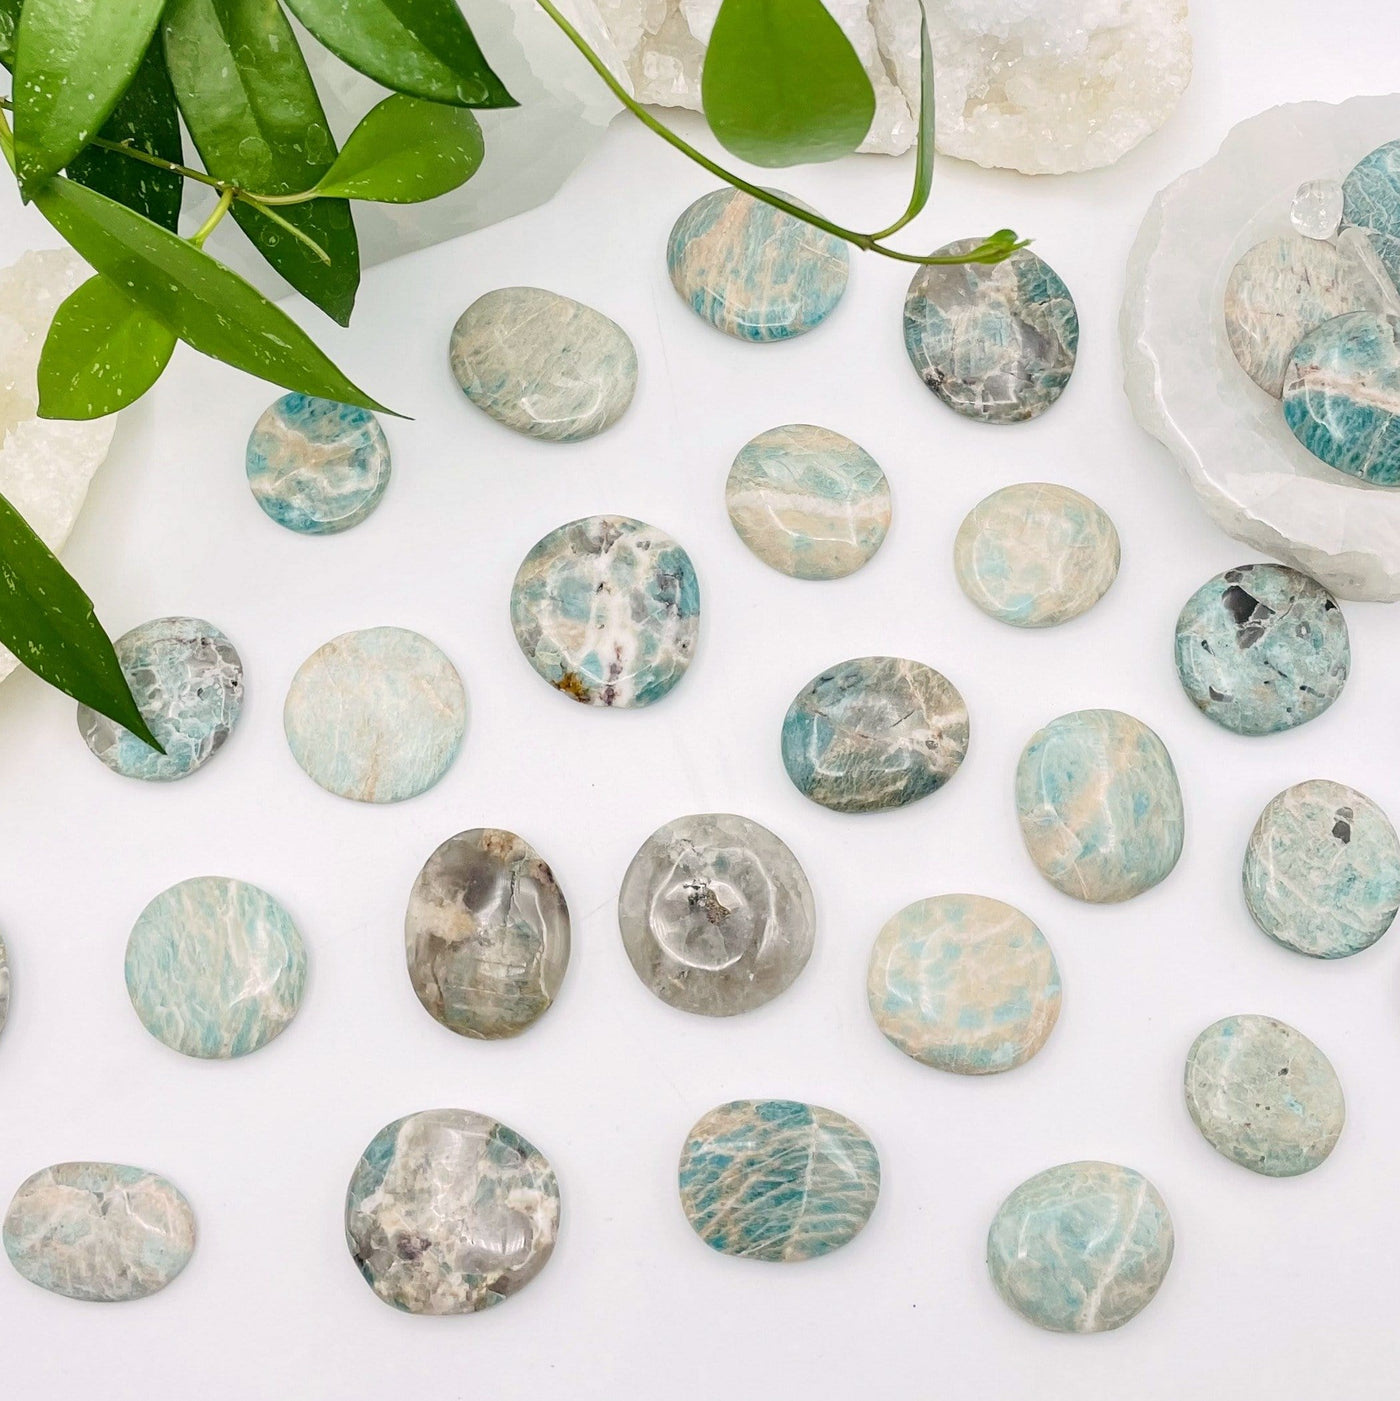 amazonite polished stones being displayed on a white background.